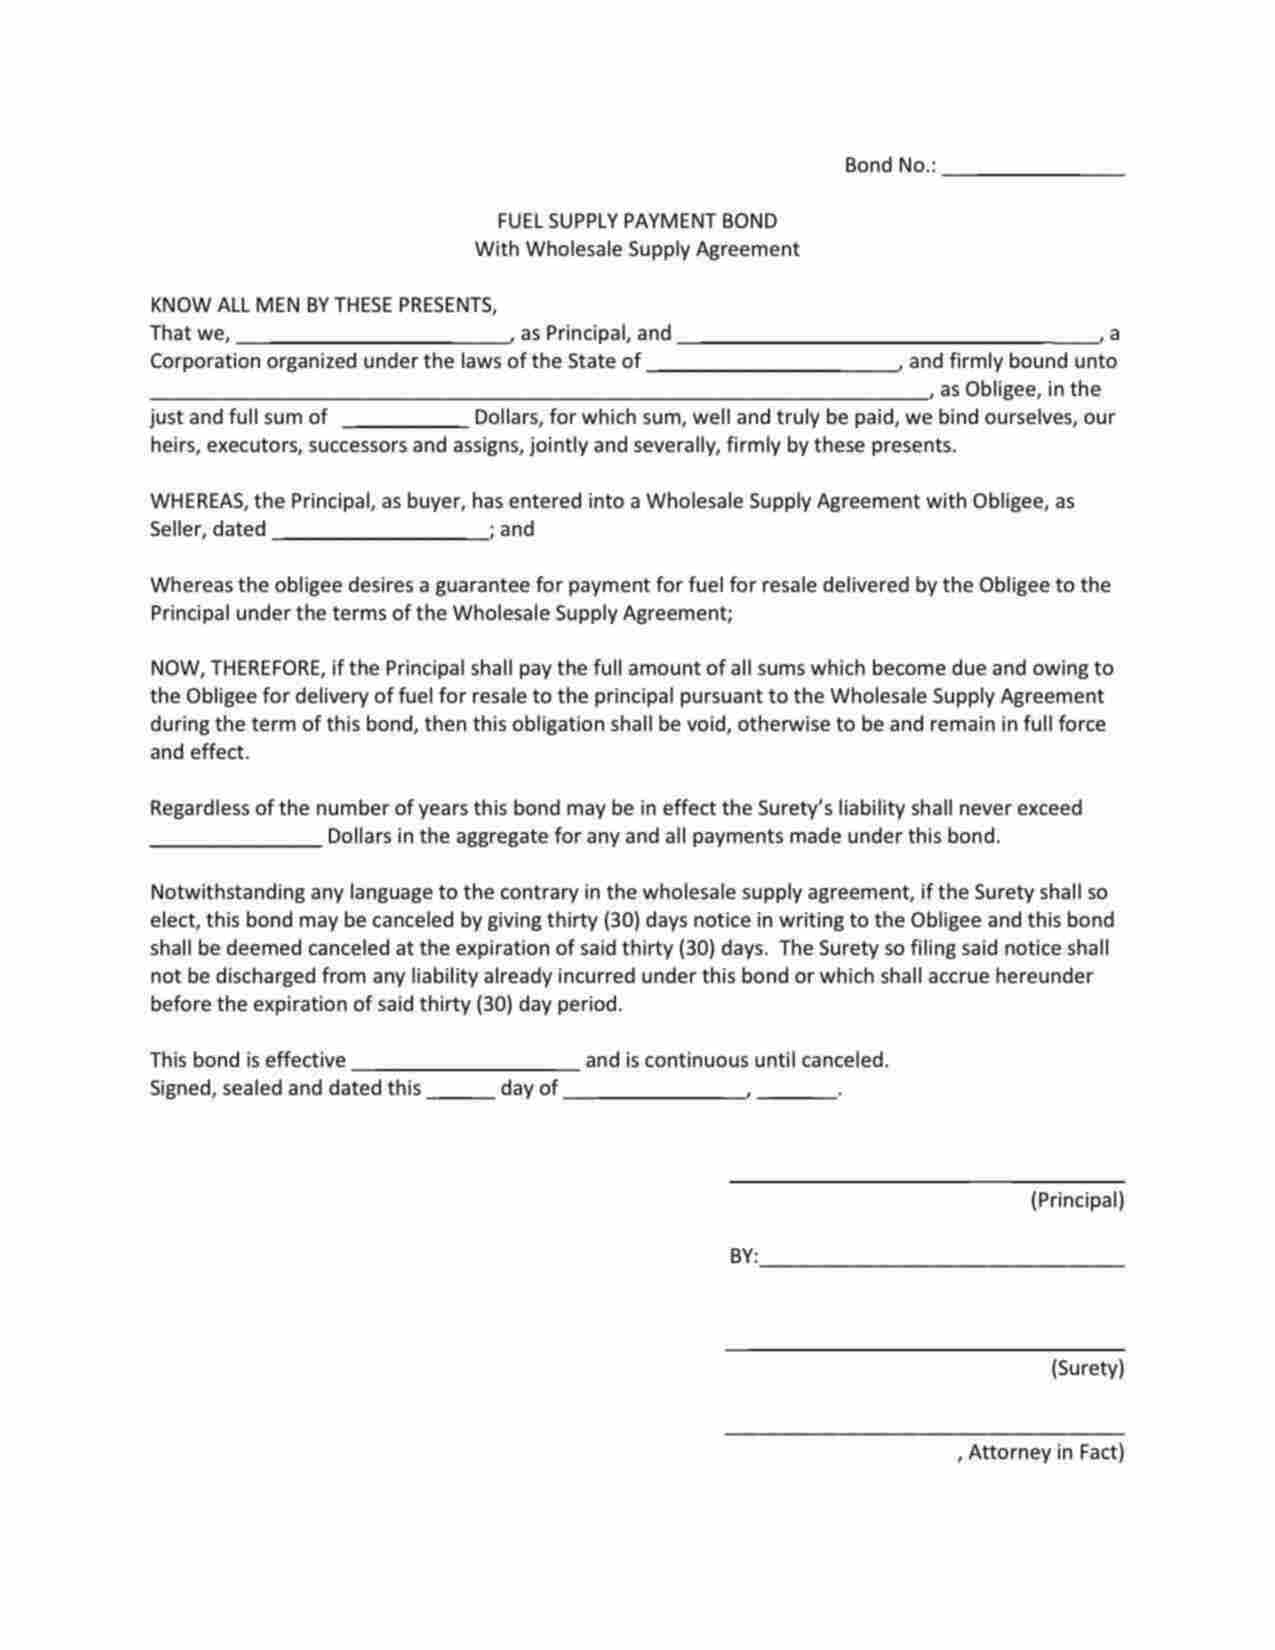 District of Columbia Fuel Supply Payment Bond Form